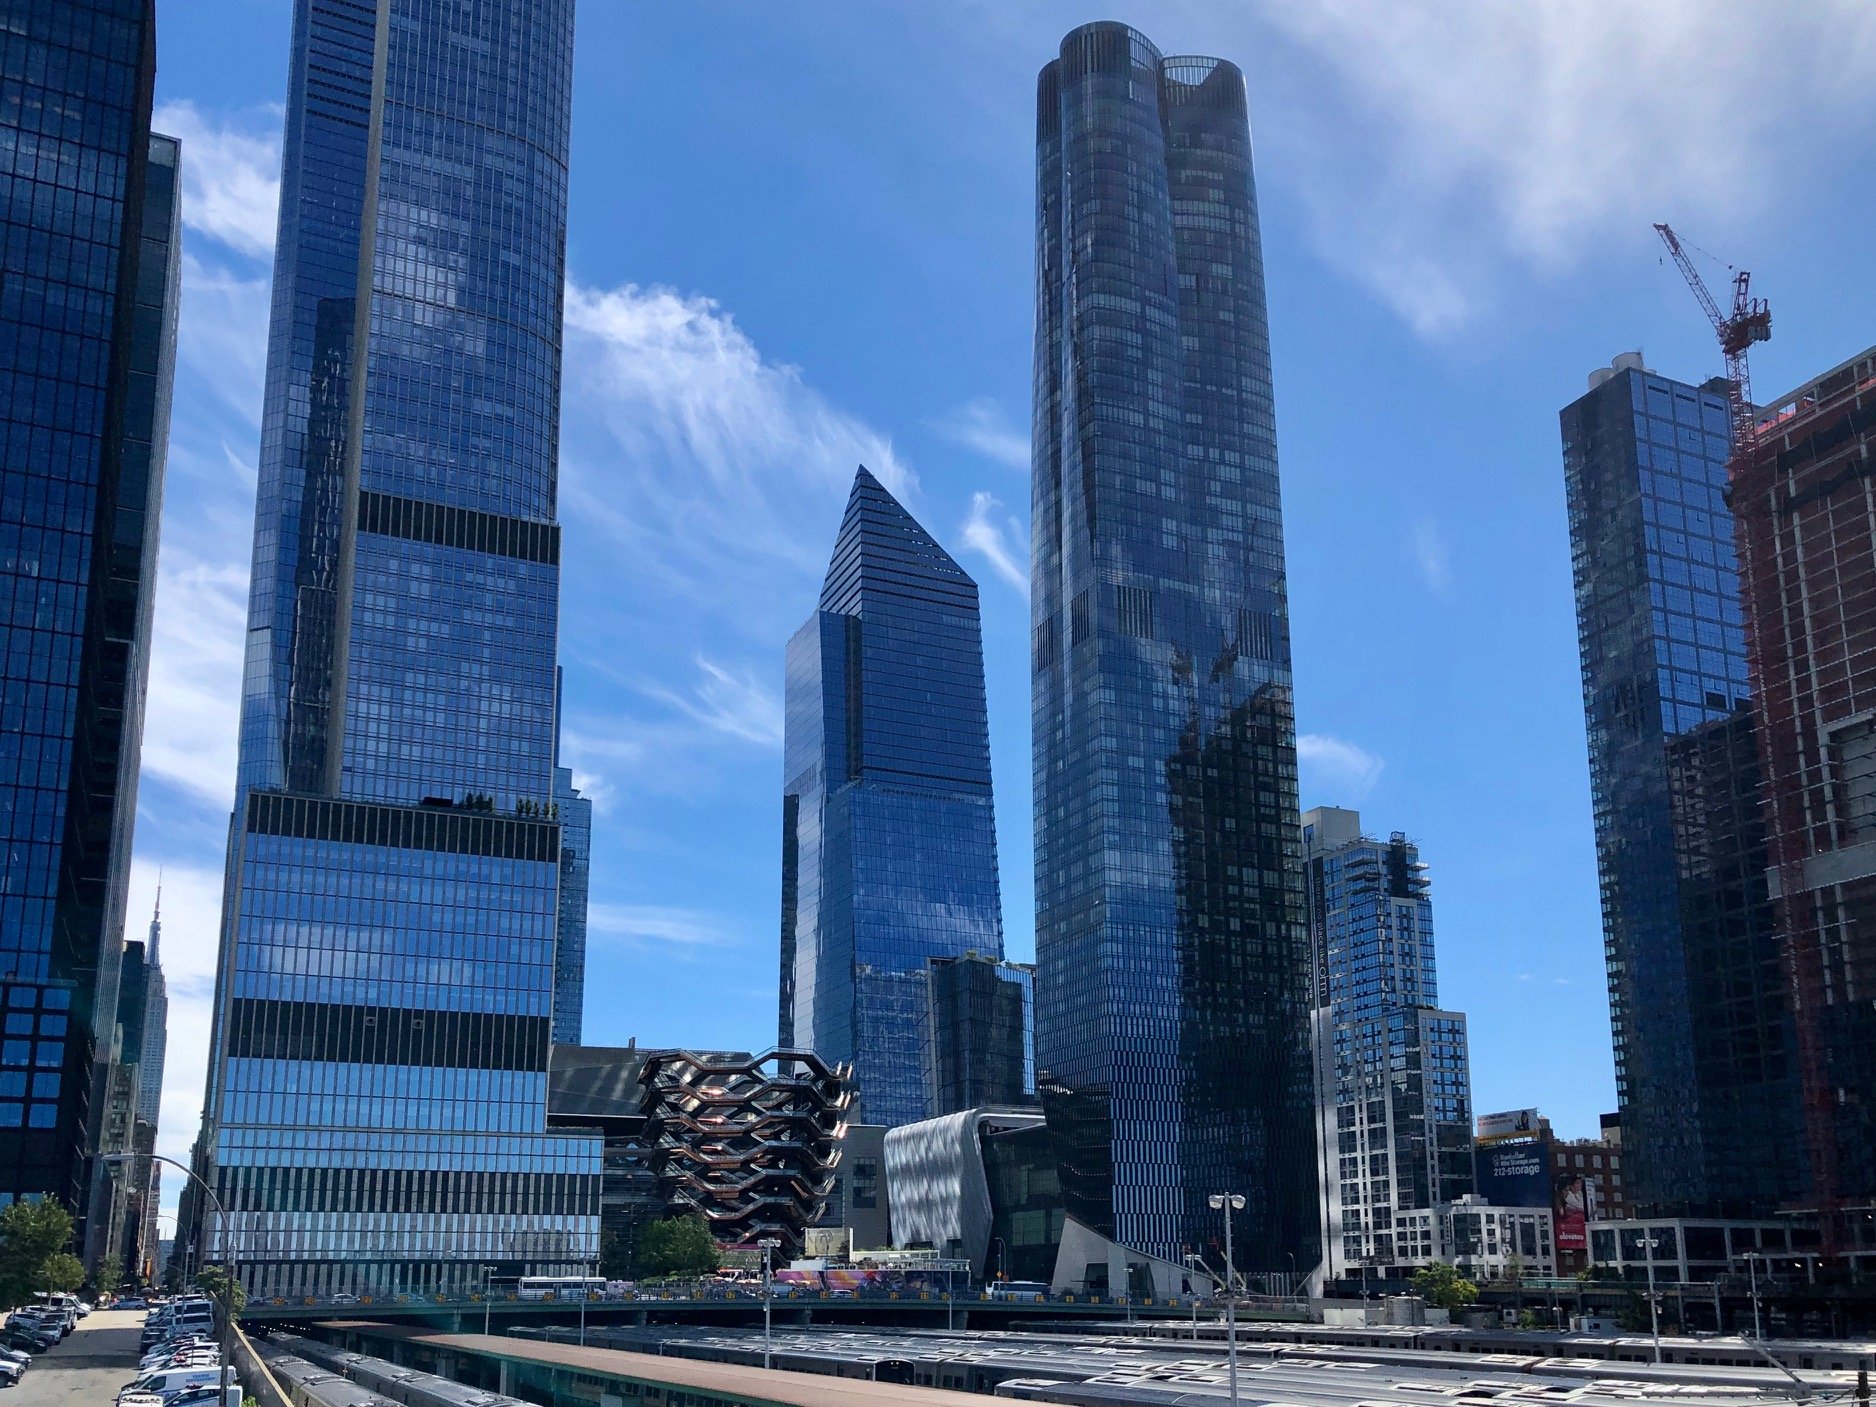  Looking back at Hudson Yards, built over the train yards, from the Highline. 